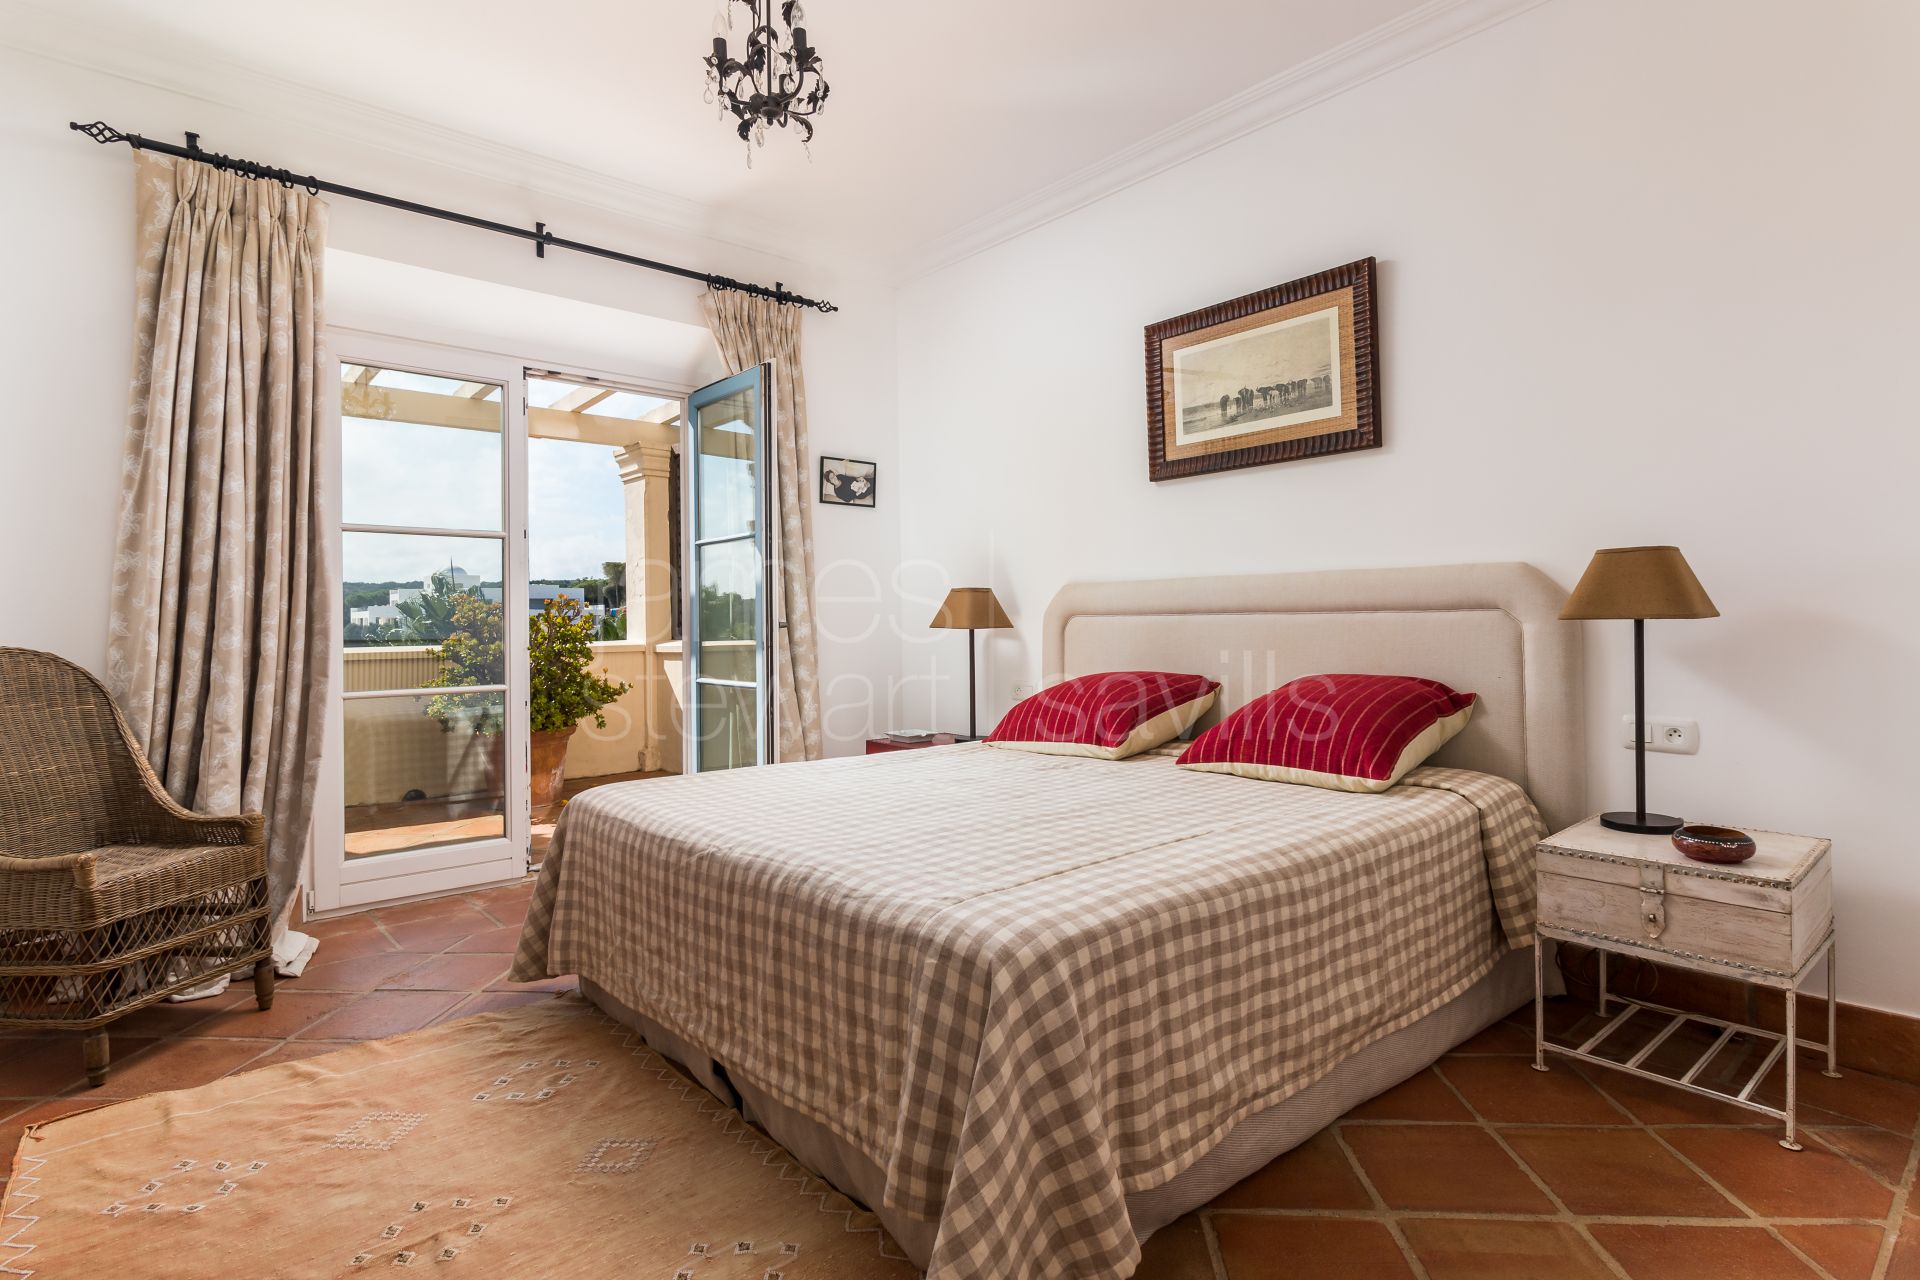 Villa in immaculate condition with golf views of three courses